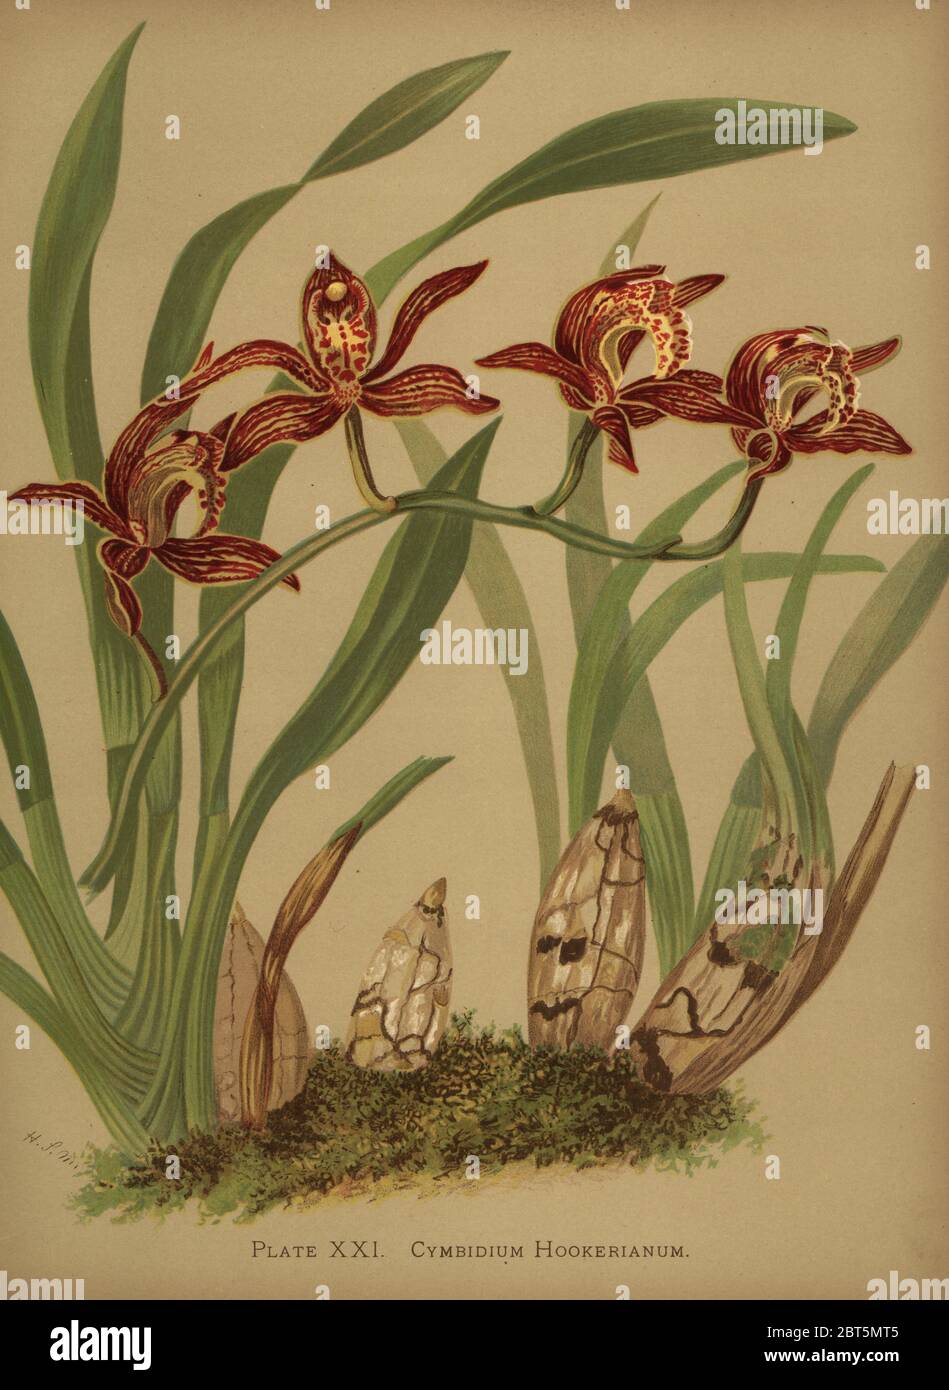 Cymbidium hookerianum orchid. Chromolithograph by Hatch Company after a botanical illustration by Harriet Stewart Miner from Orchids, the Royal Family of Plants, Lee & Shepard, Boston, 1885. The first American color plate book on orchids by woman botanist Miner. Stock Photo